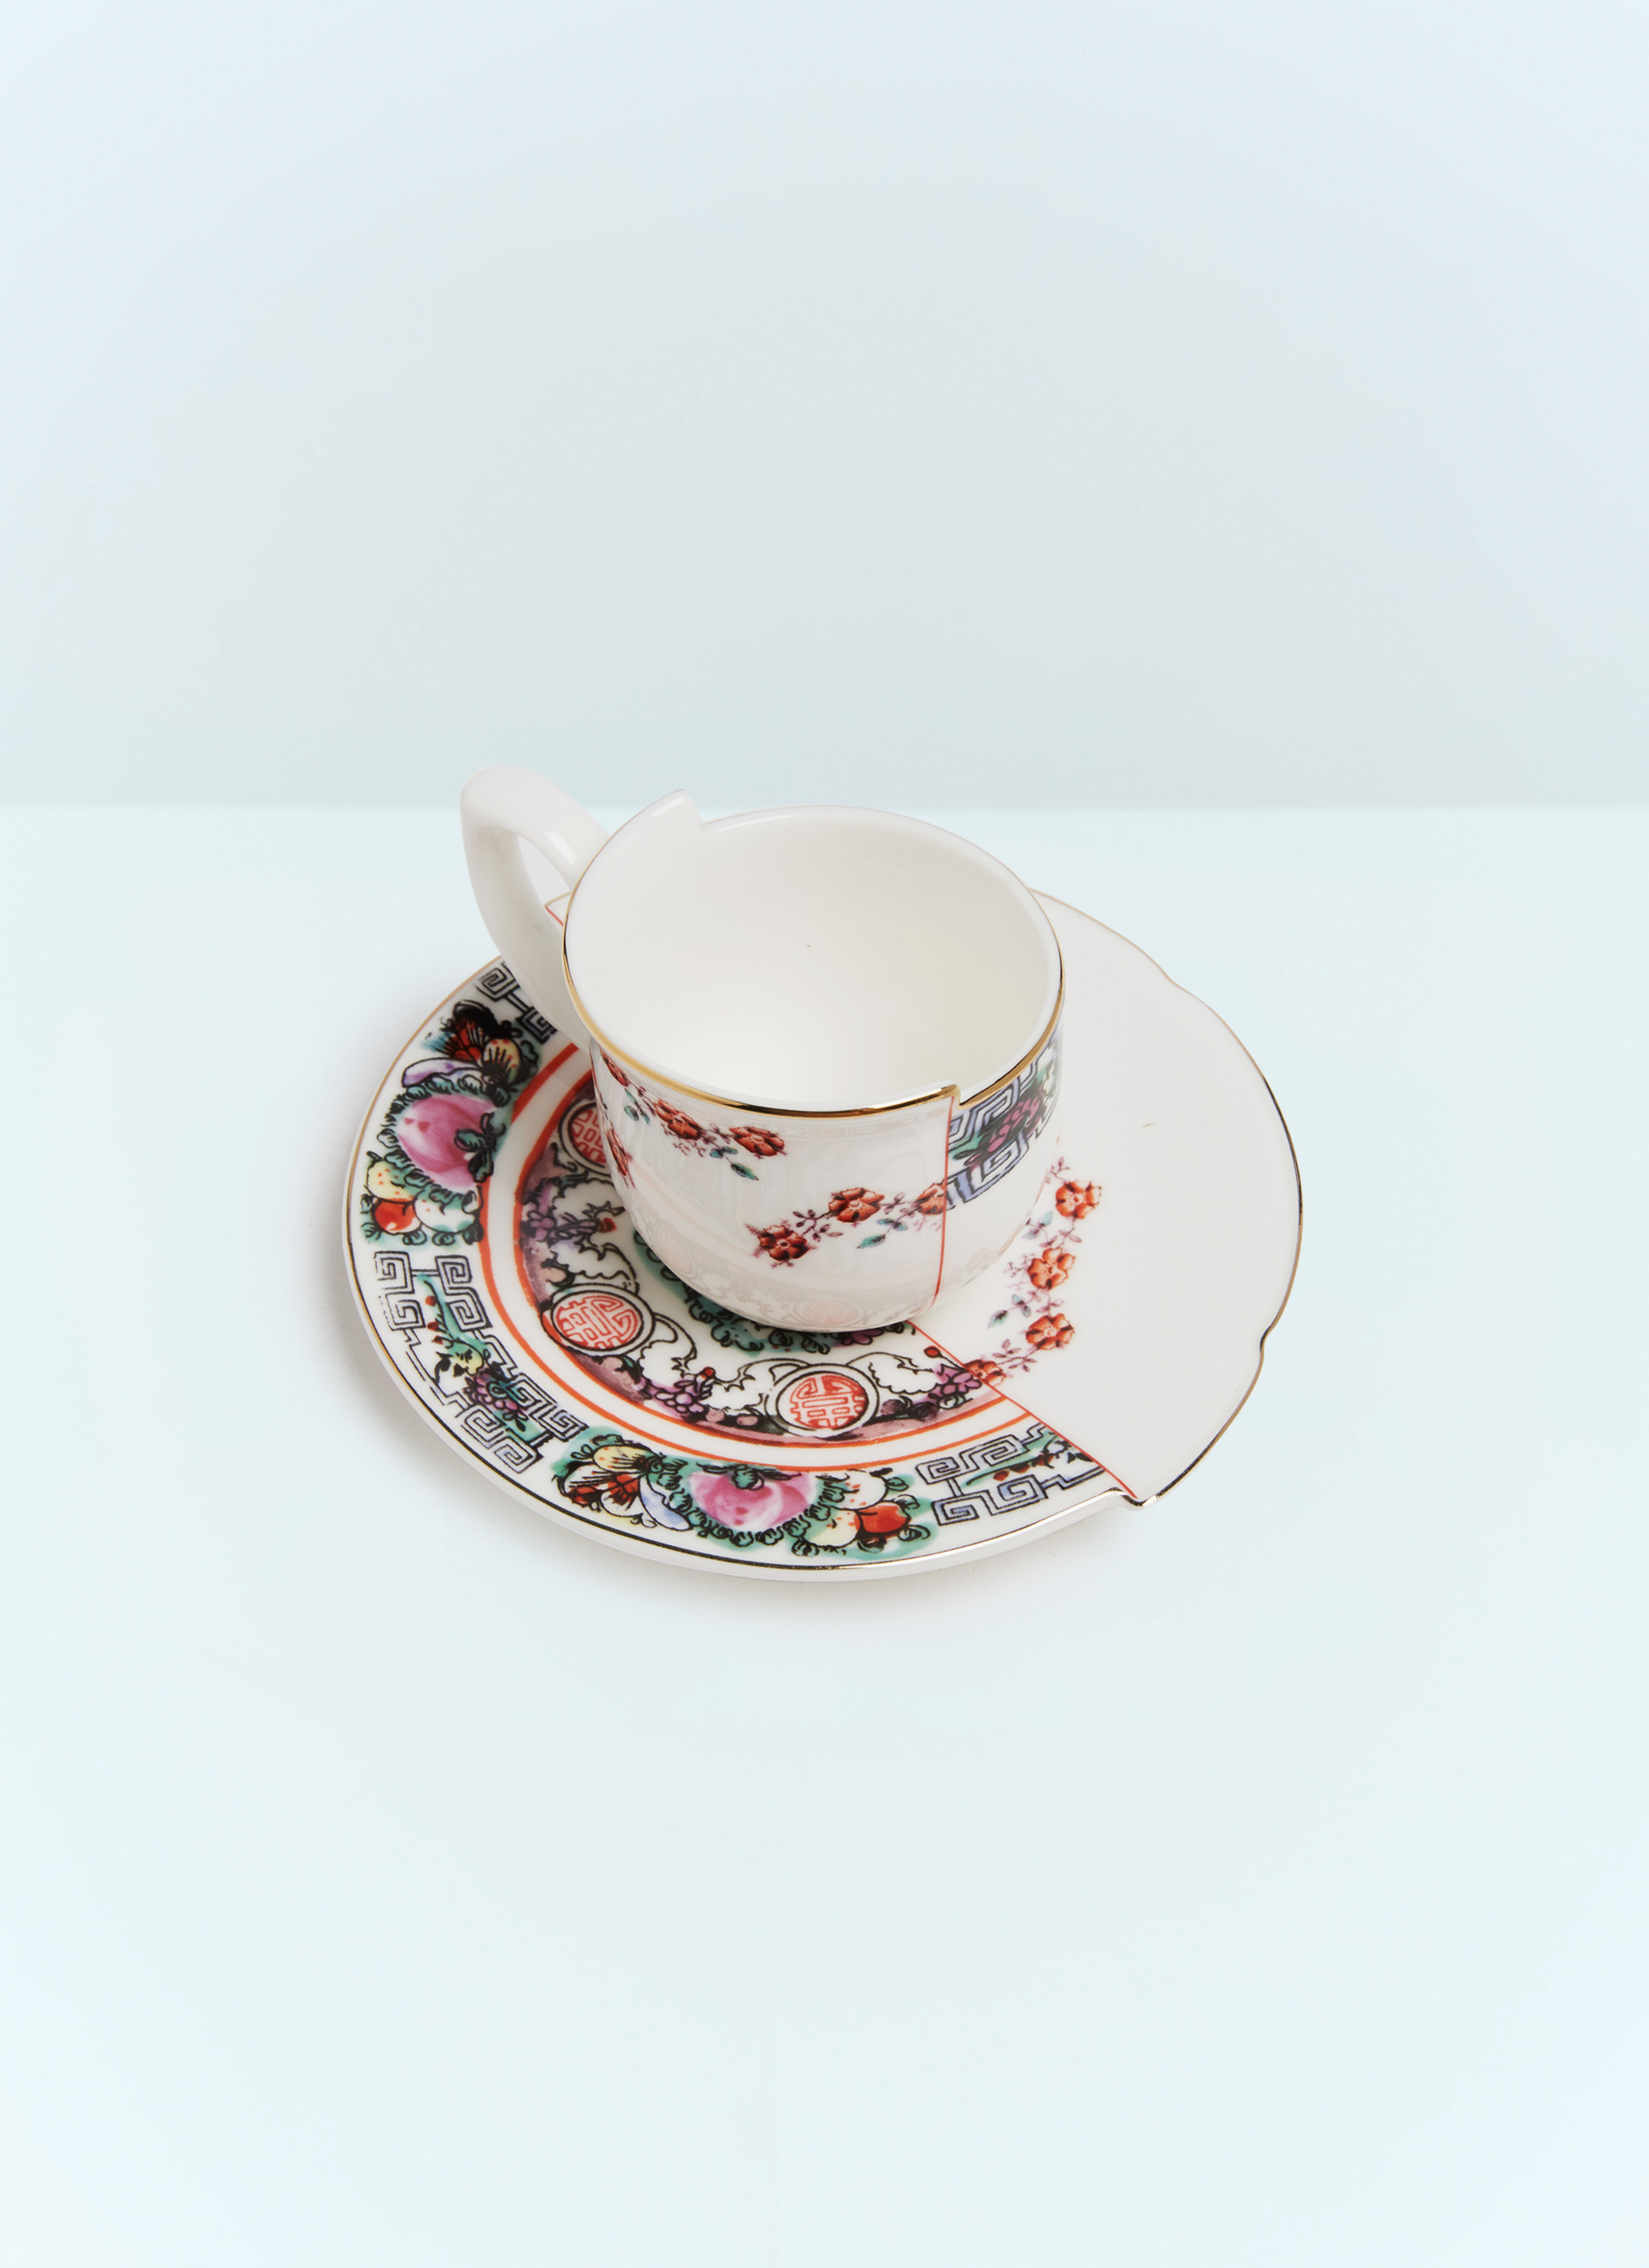 Les Ottomans Hybrid Tamara Coffee Cup With Saucer Clear wps0691229